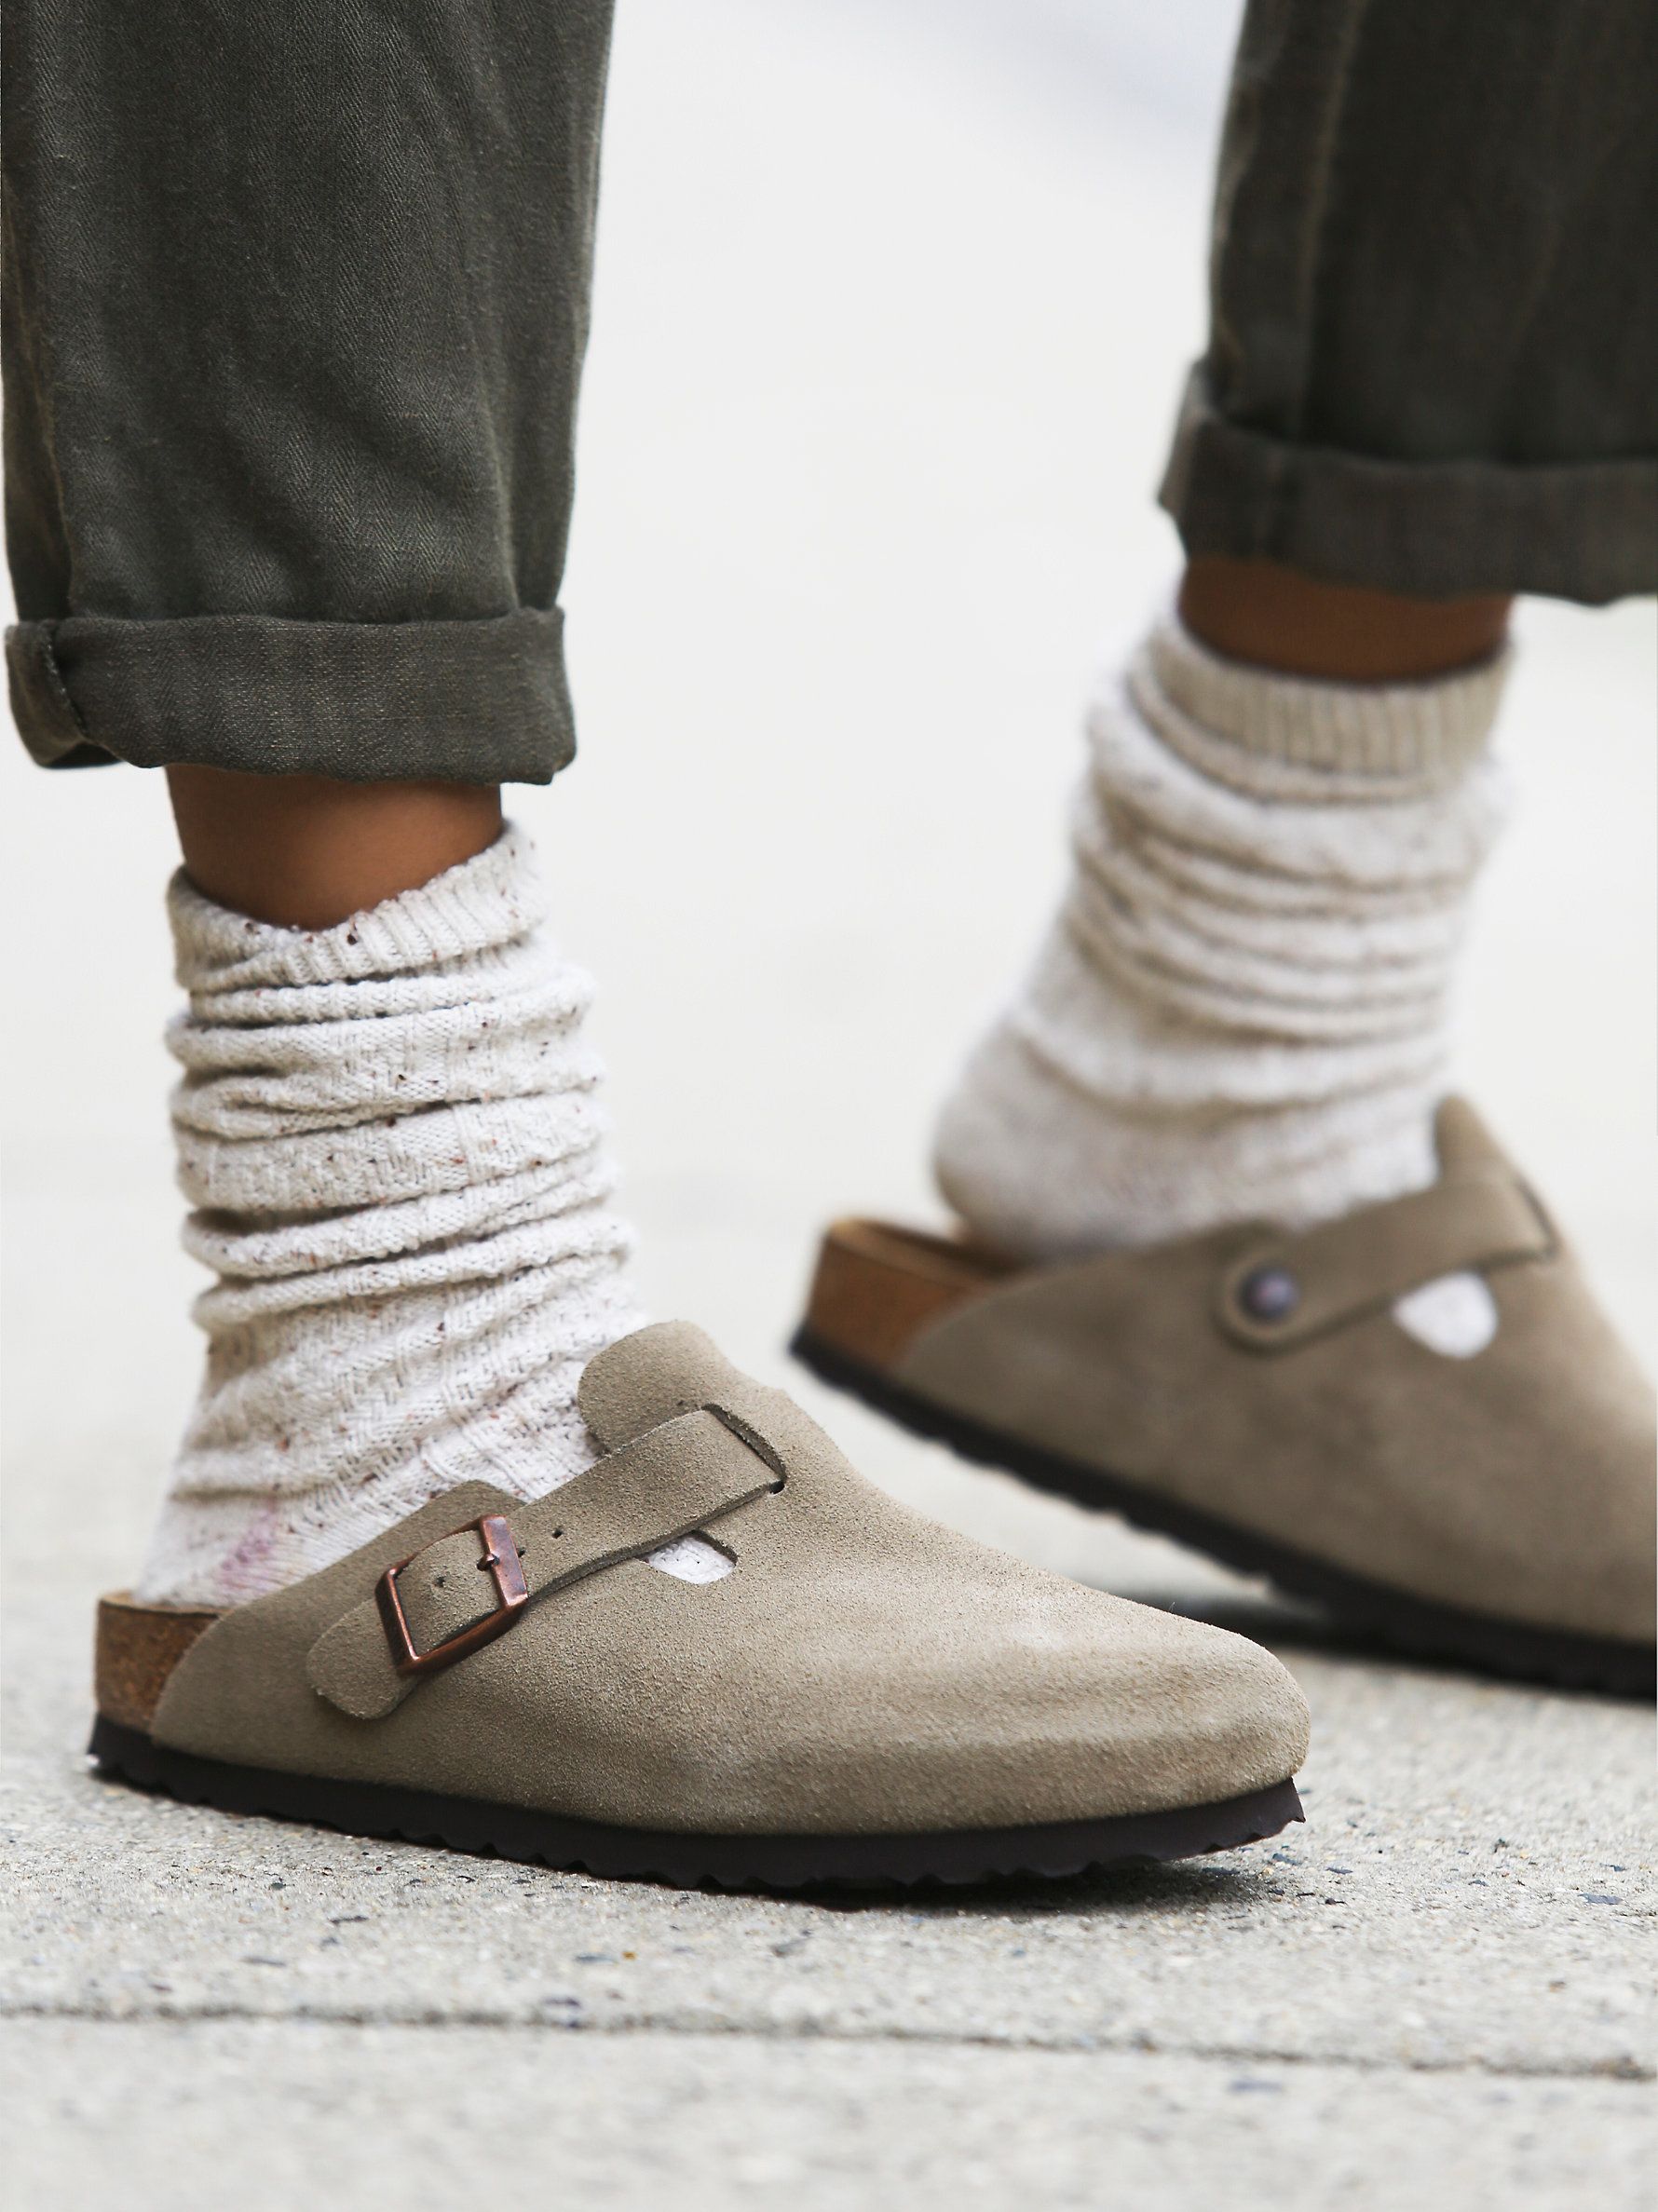 When have the Birkenstock Boston become cool?